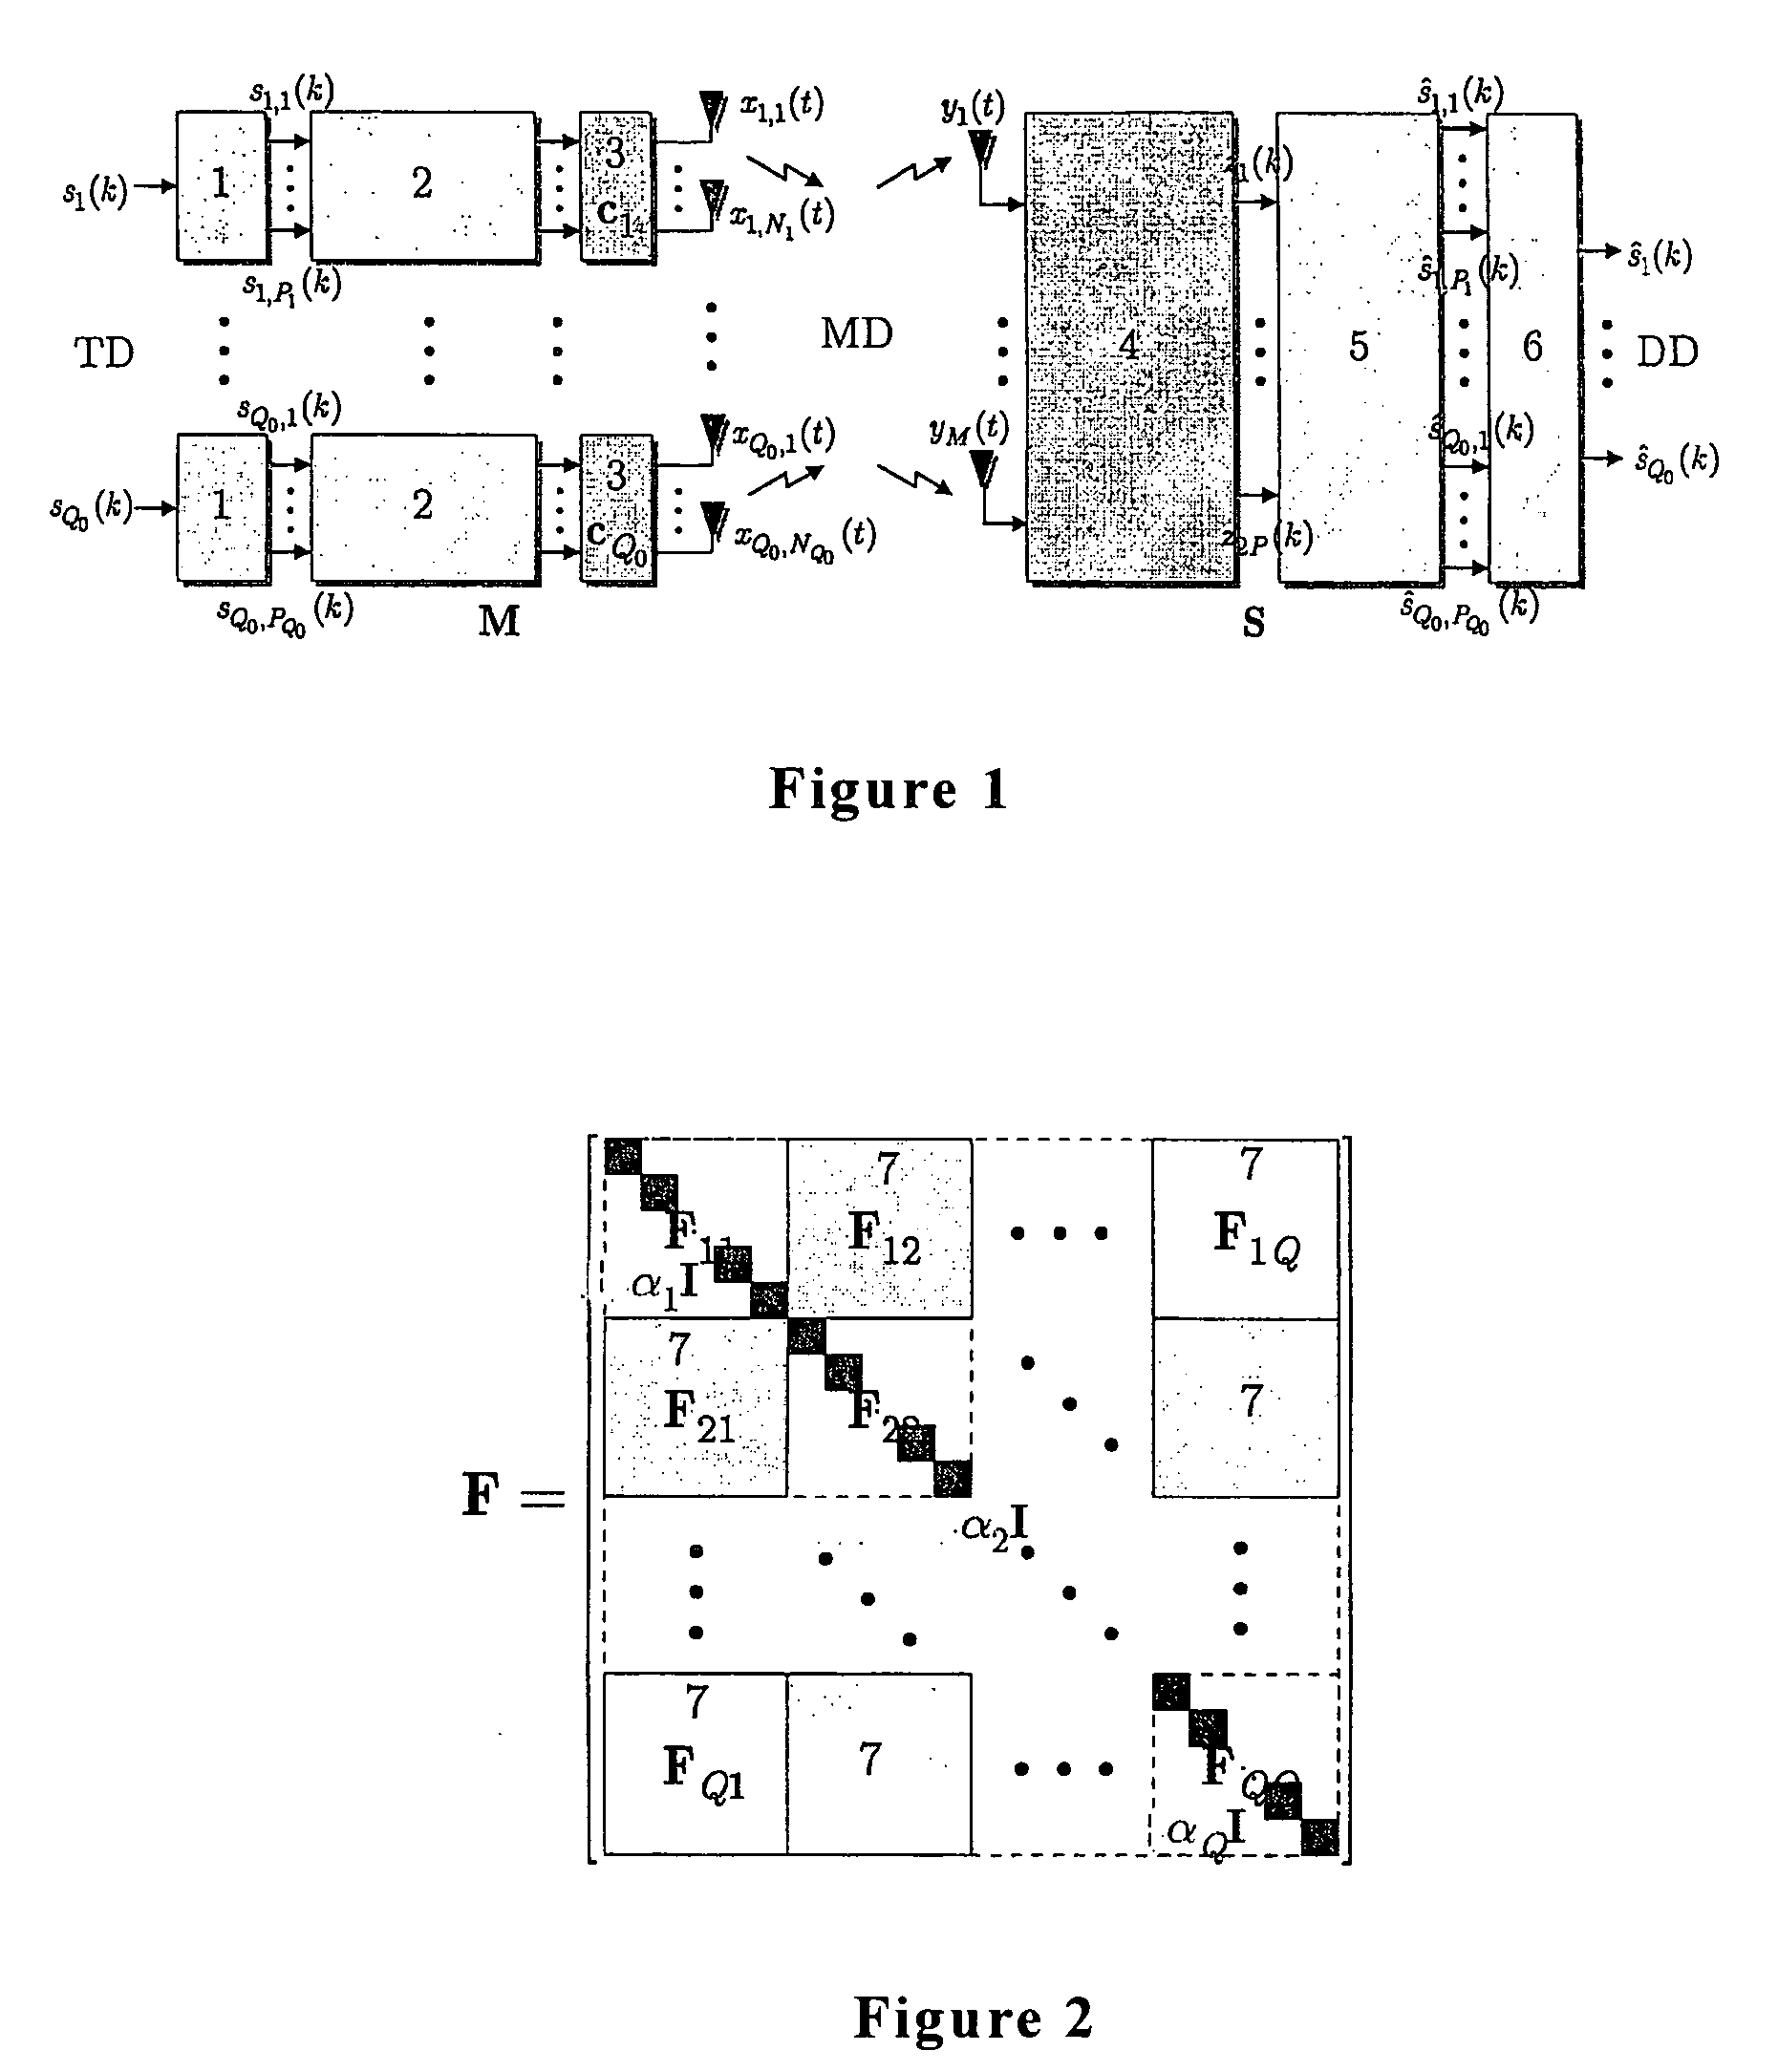 Method of symbol detection for MIMO dual-signaling uplink CDMA systems